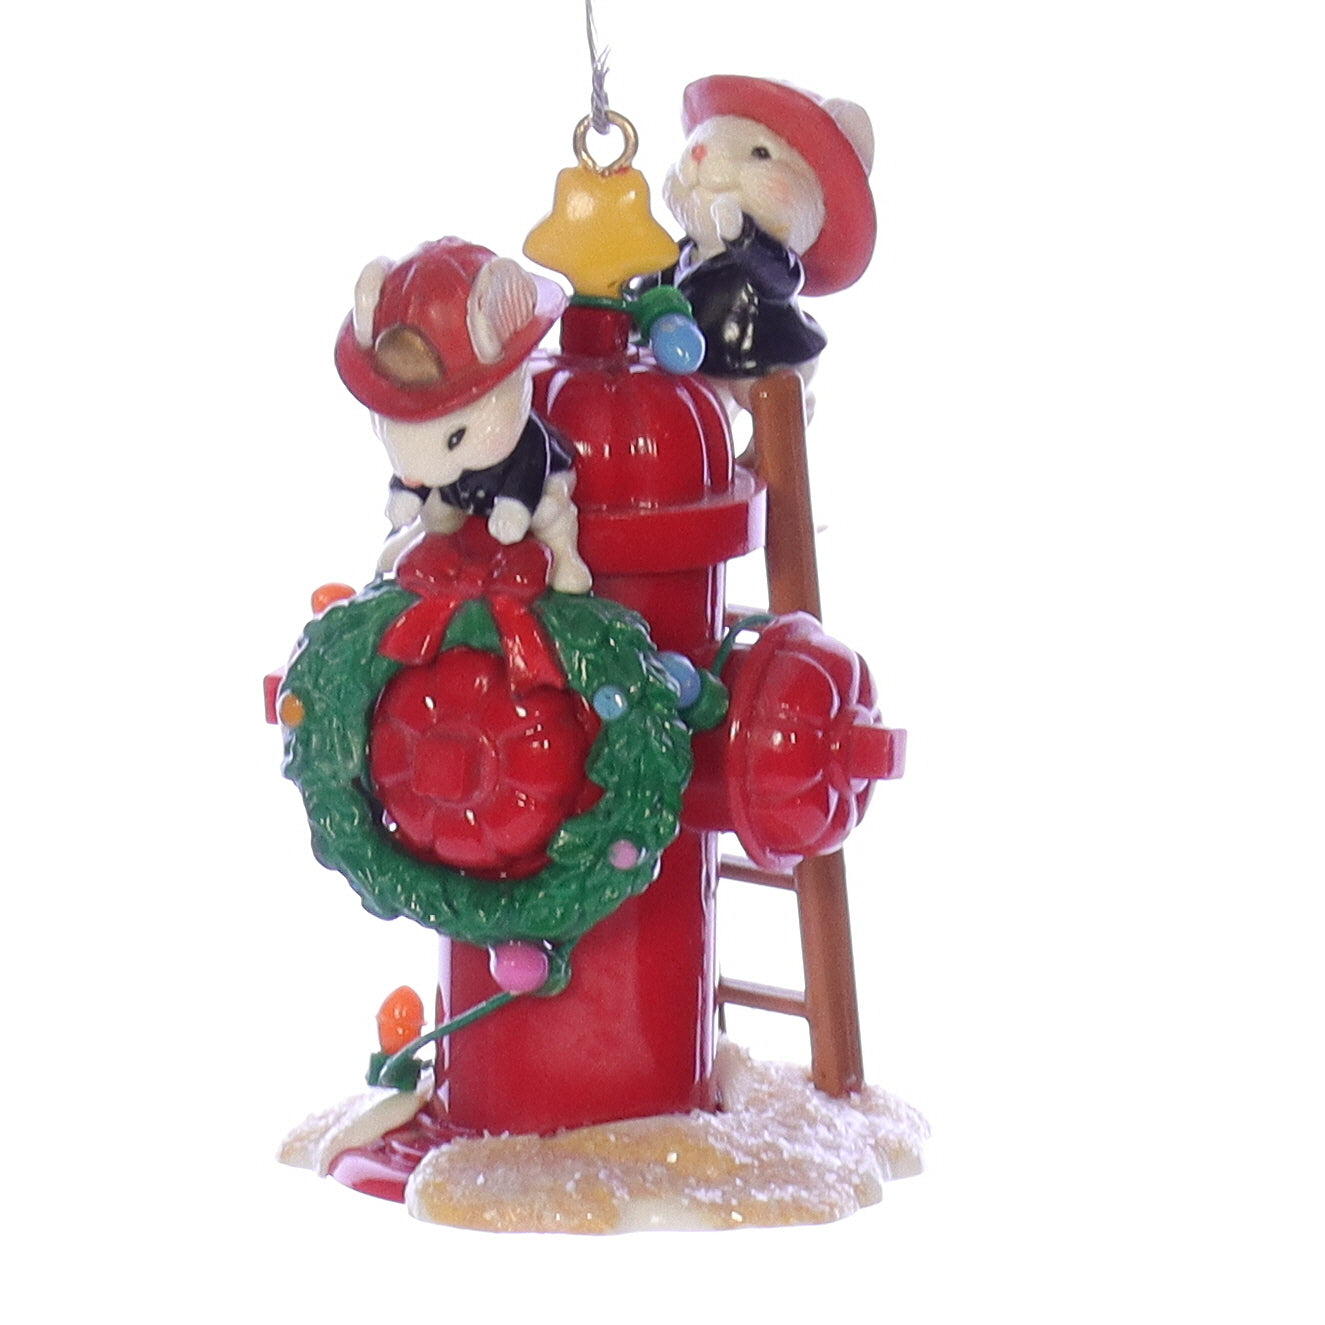 Enesco_Treasury_of_Christmas_Ornaments_573825_Warmest_Wishes_Northpole_Fire_Department_Mouse_Ornament_1990 Front Right View